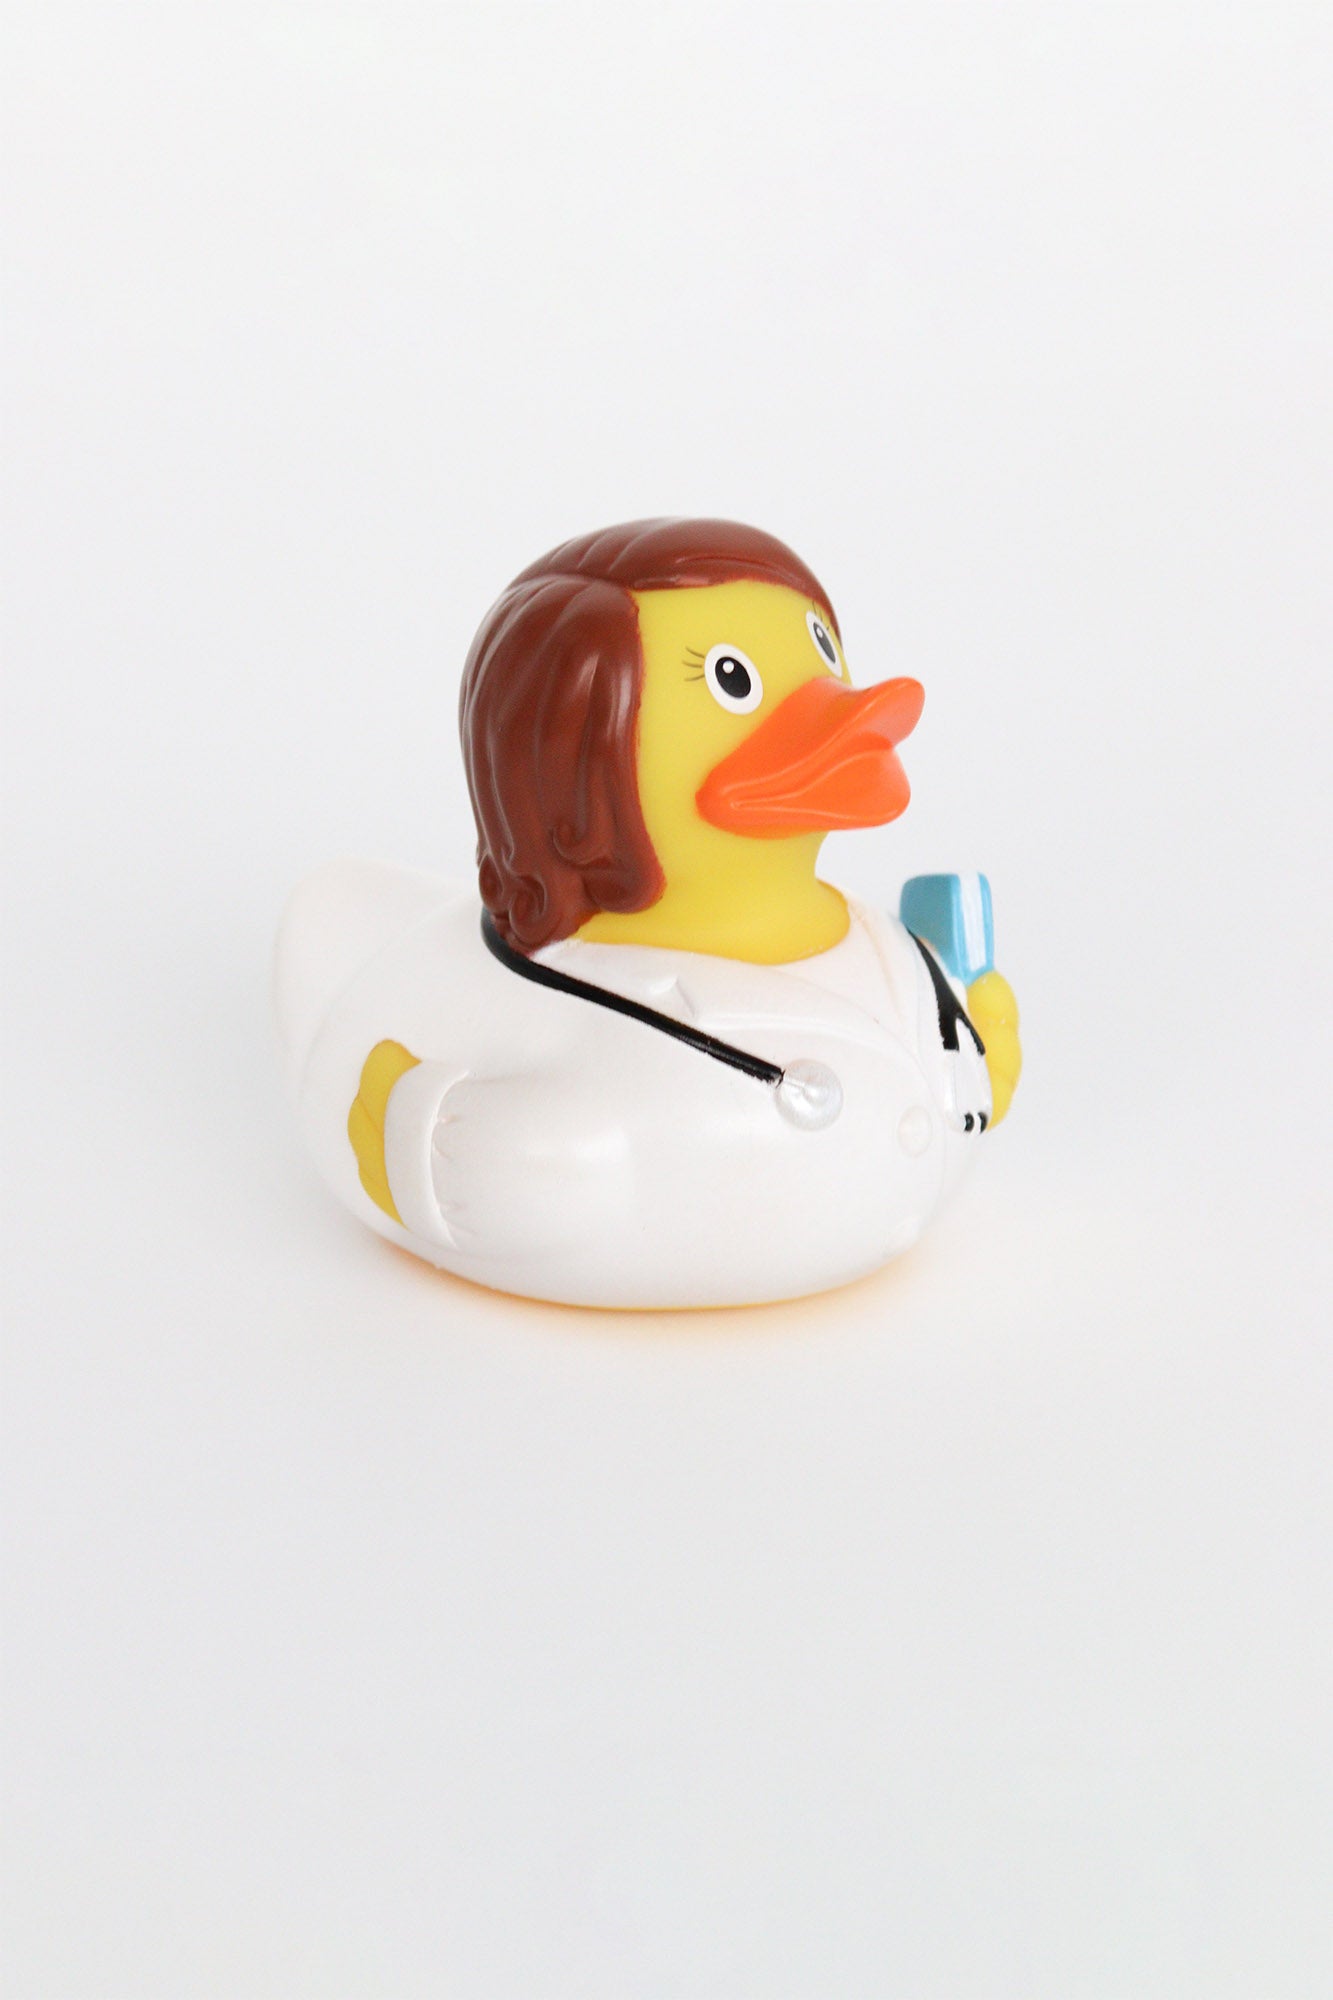 Female doctor plastic duck toy